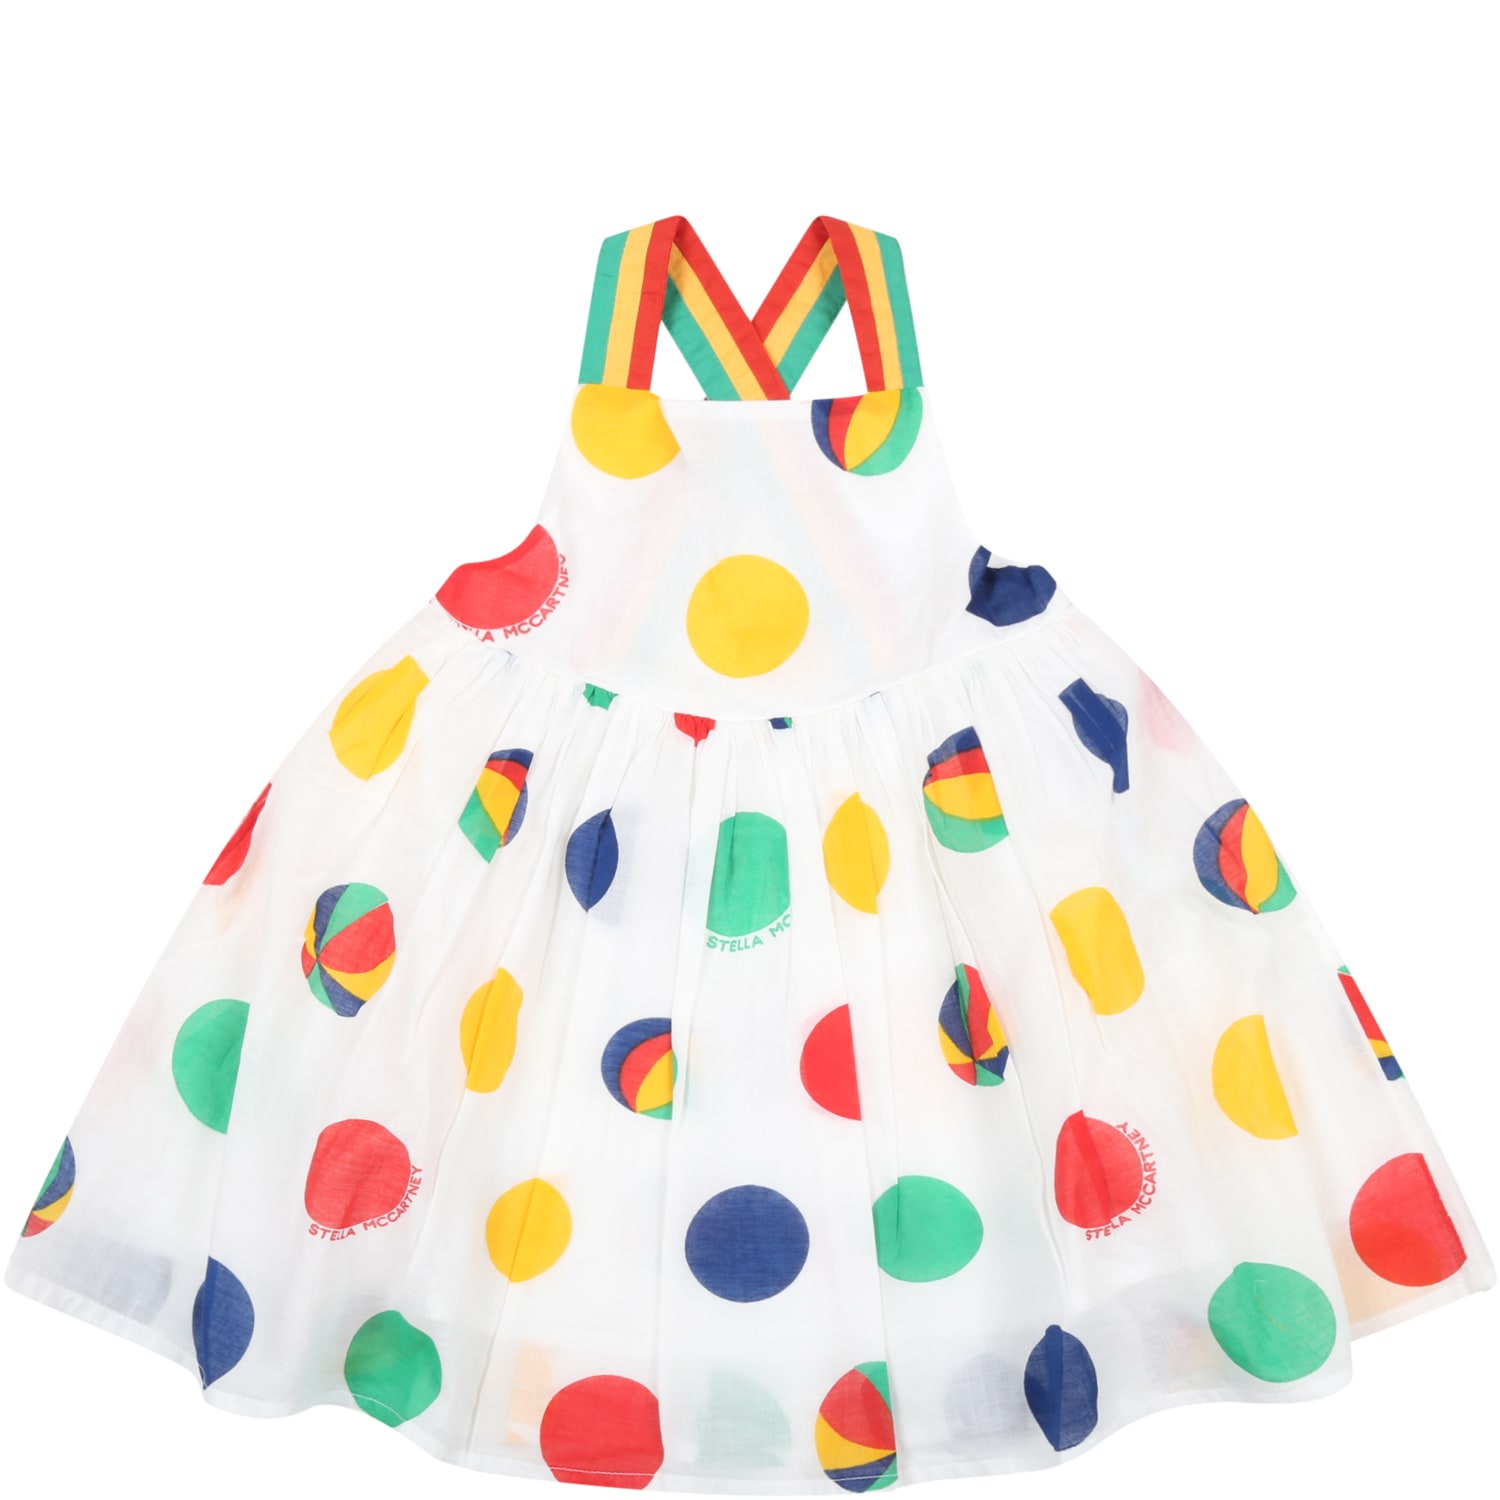 Stella McCartney Kids White Dress For Baby Girl With Colorful Circles